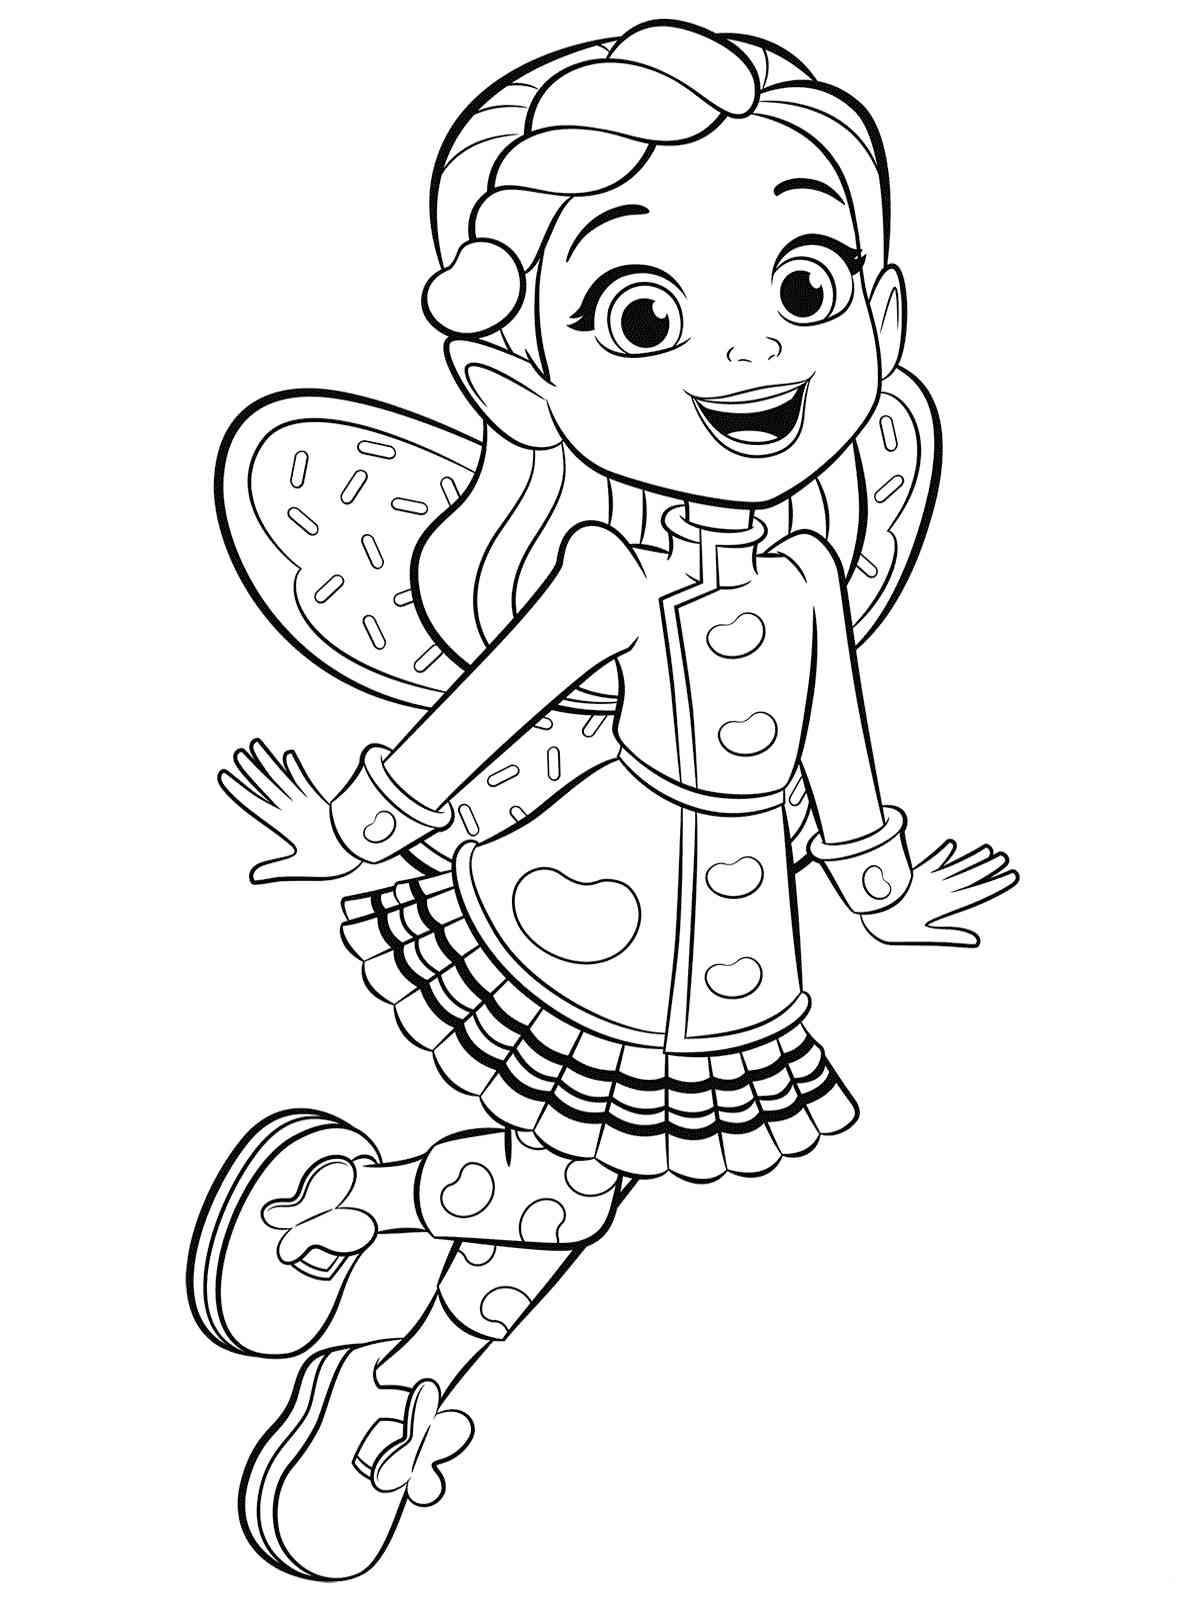 Butterbean’s Cafe 1 coloring page